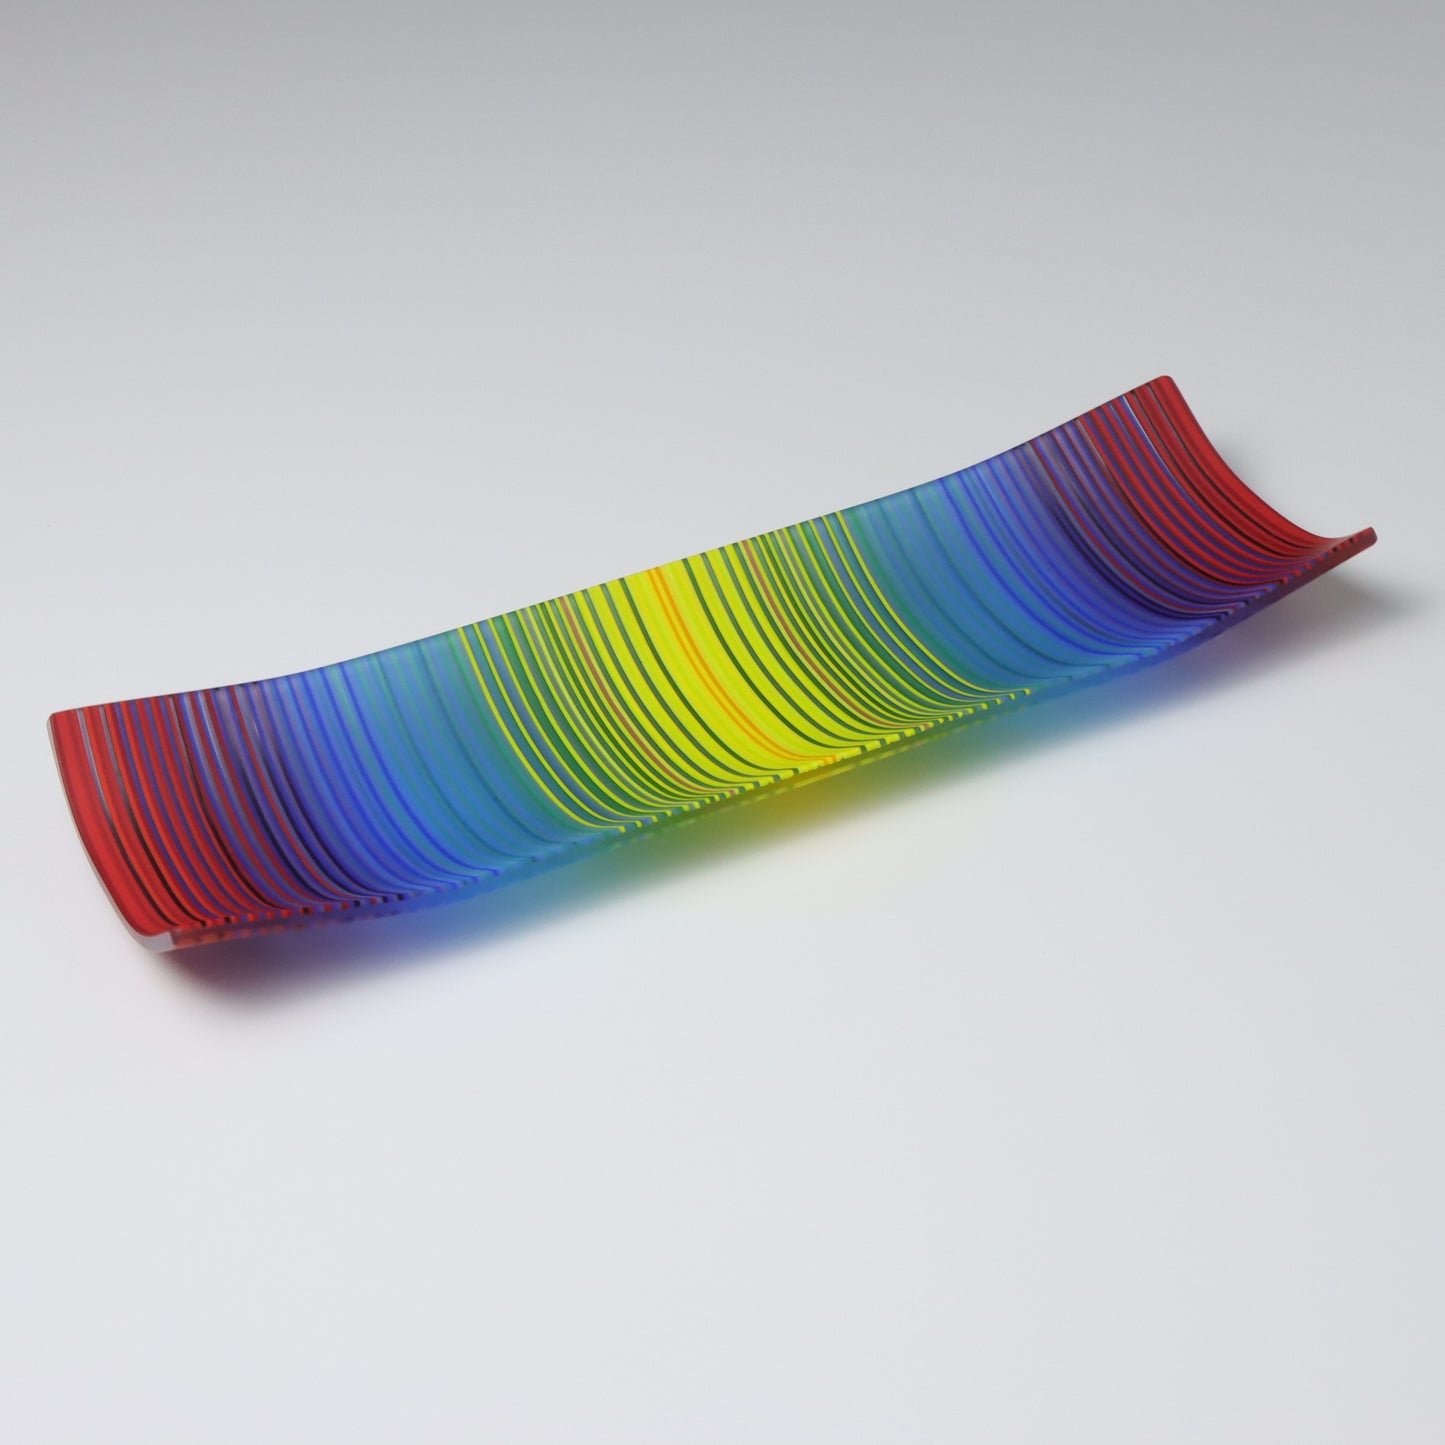 S3729 | Rectangular Shaped ColourWave Glass Plate | Red, Purple, Blue, Green and Yellow